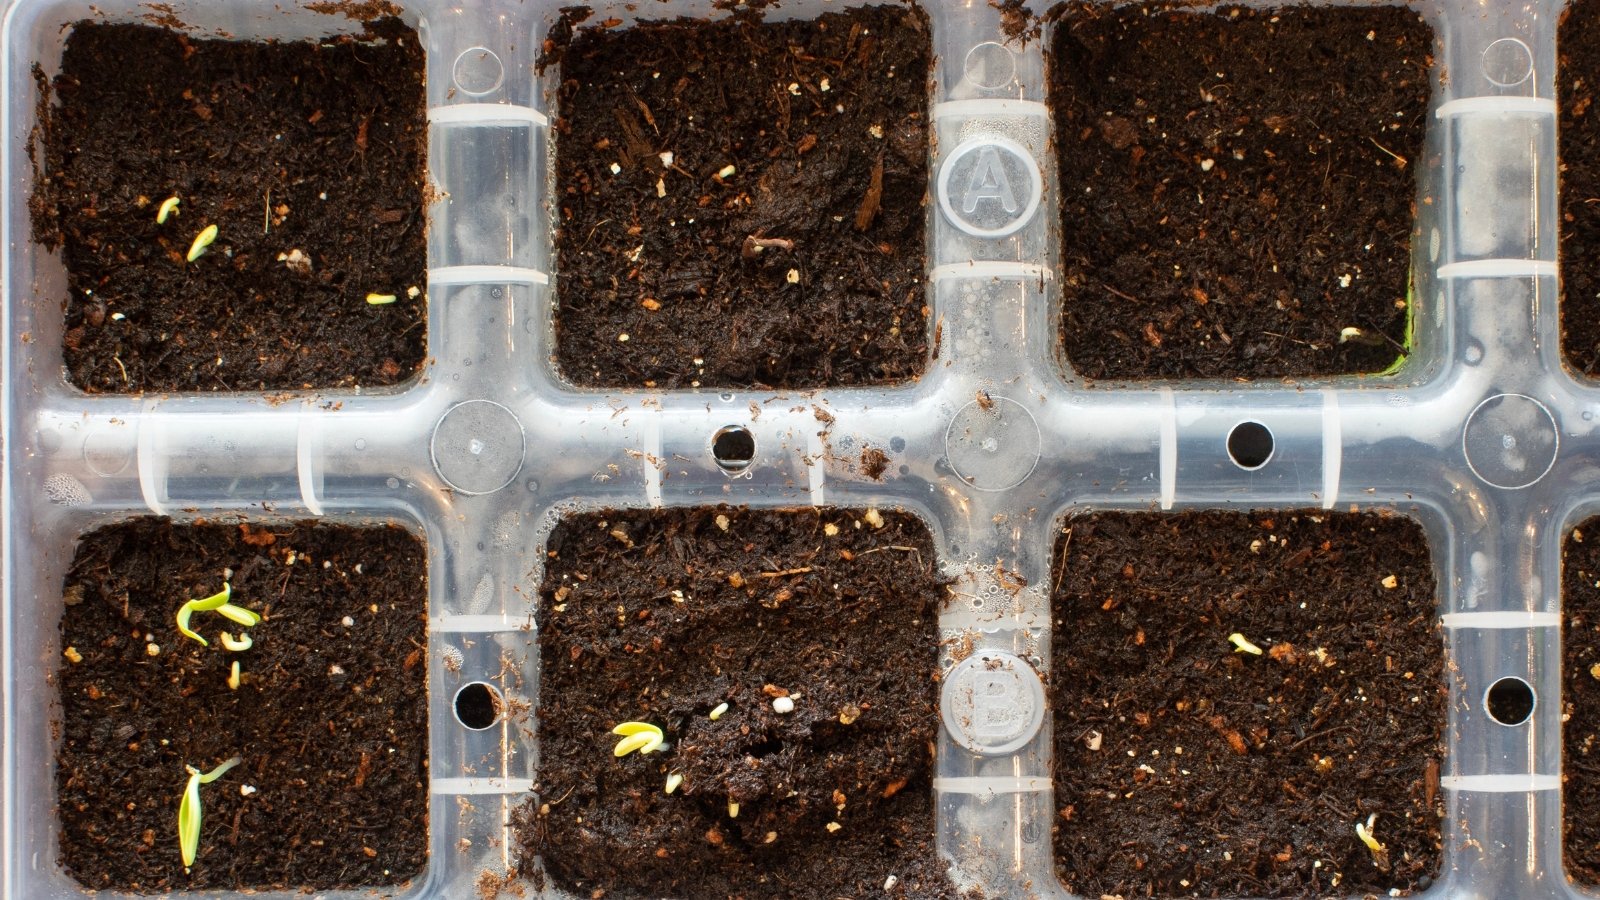 A close-up of a transparent seedling tray displays dark, moist soil, ready for planting, promising growth and vitality in the coming days, a canvas for life's green beginnings.